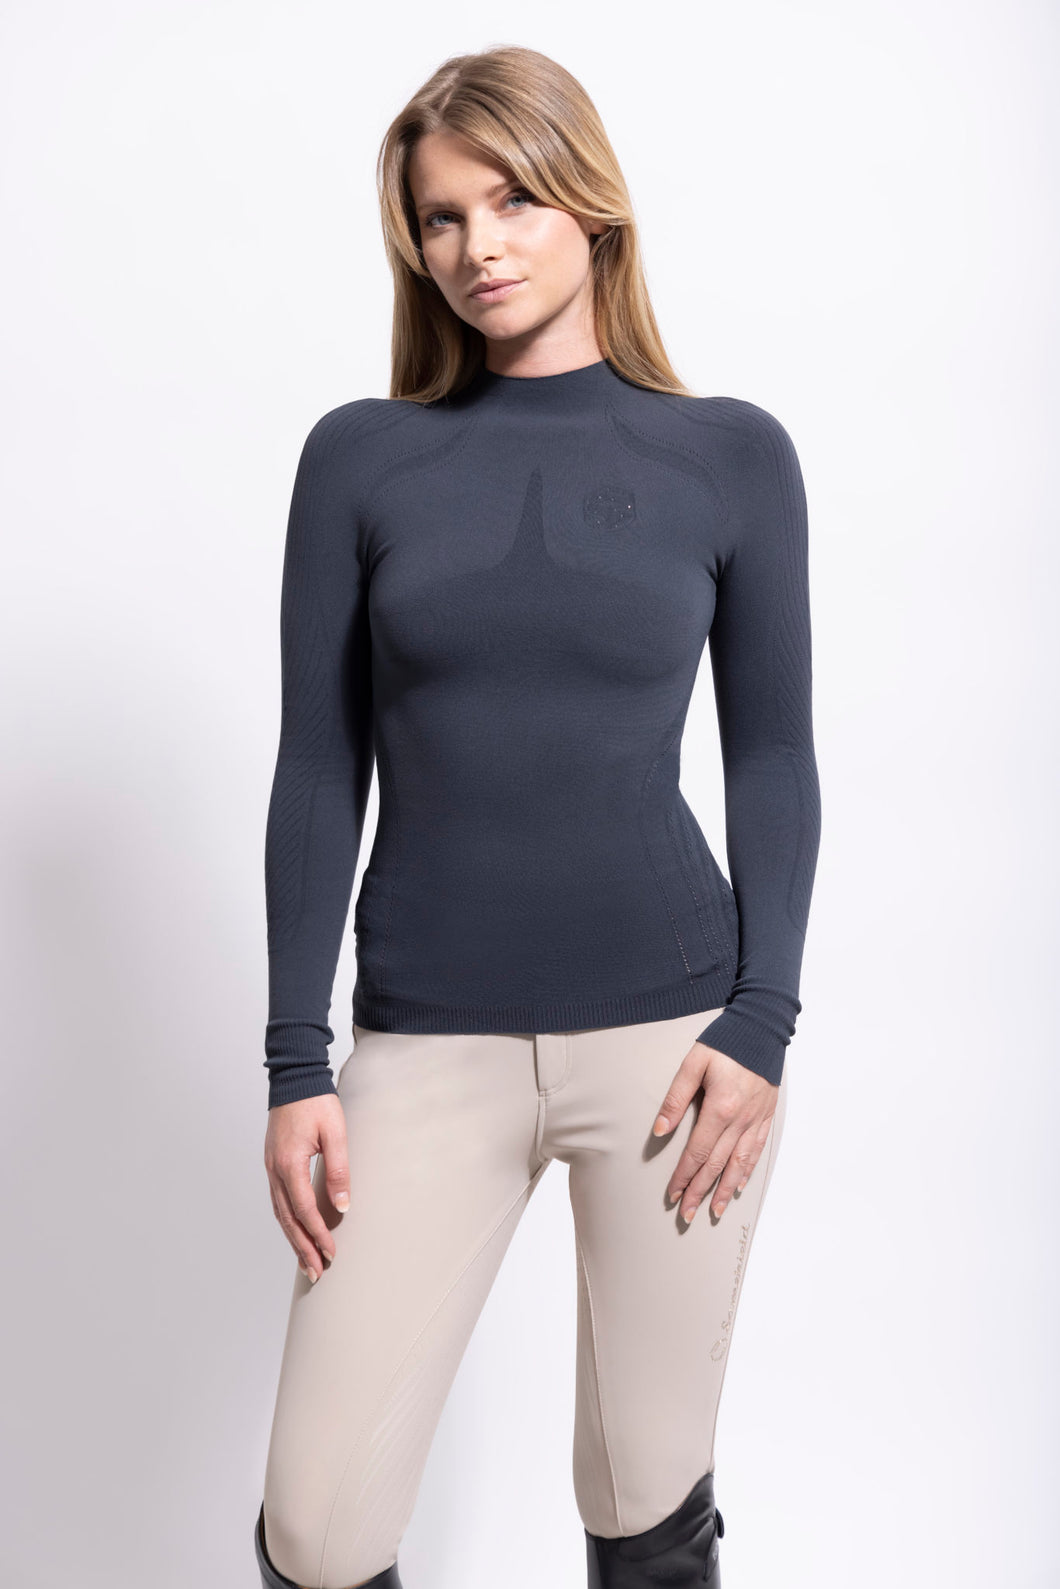 Samshield Alicia Seamless Long Sleeve Top Anthracite